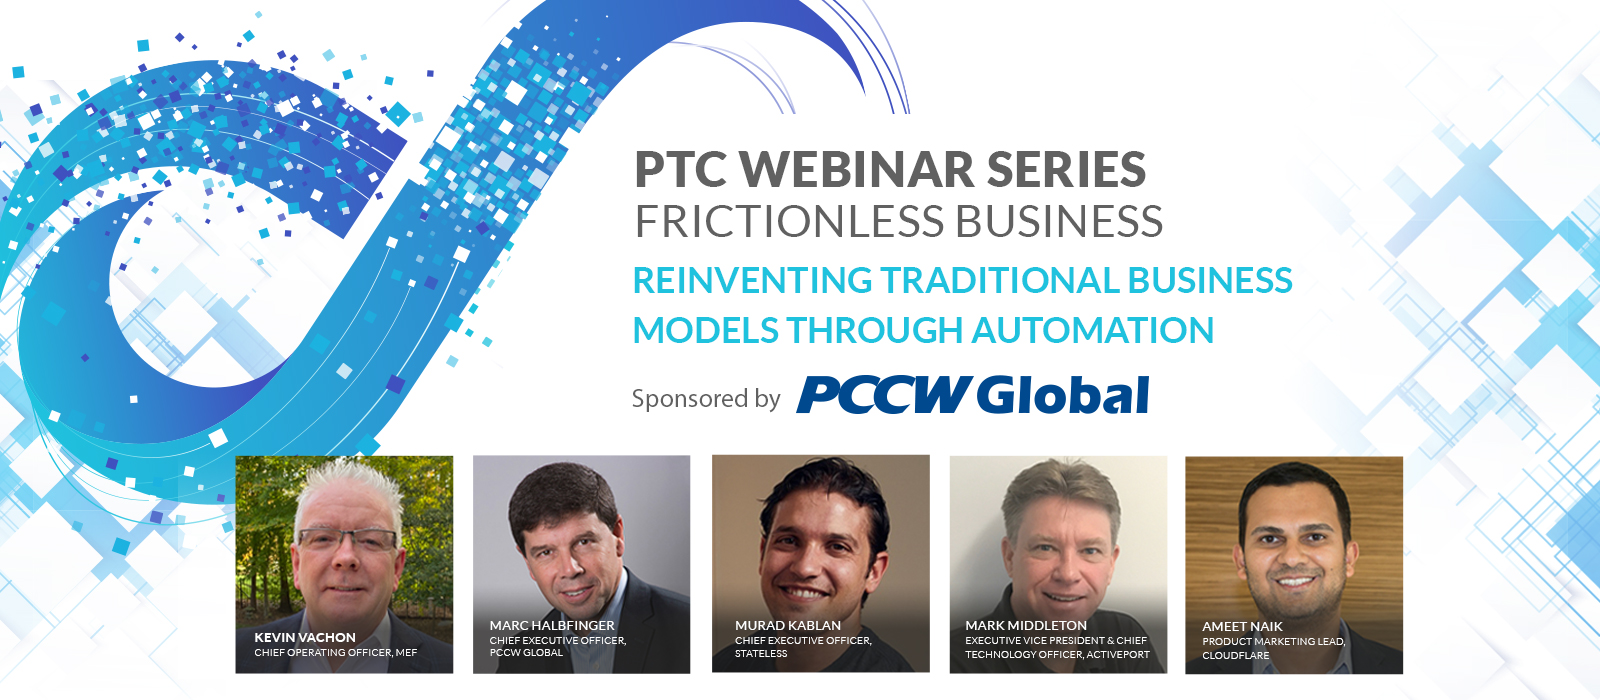 PTC Webinar Series: Reinventing Traditional Business Models Through Automation